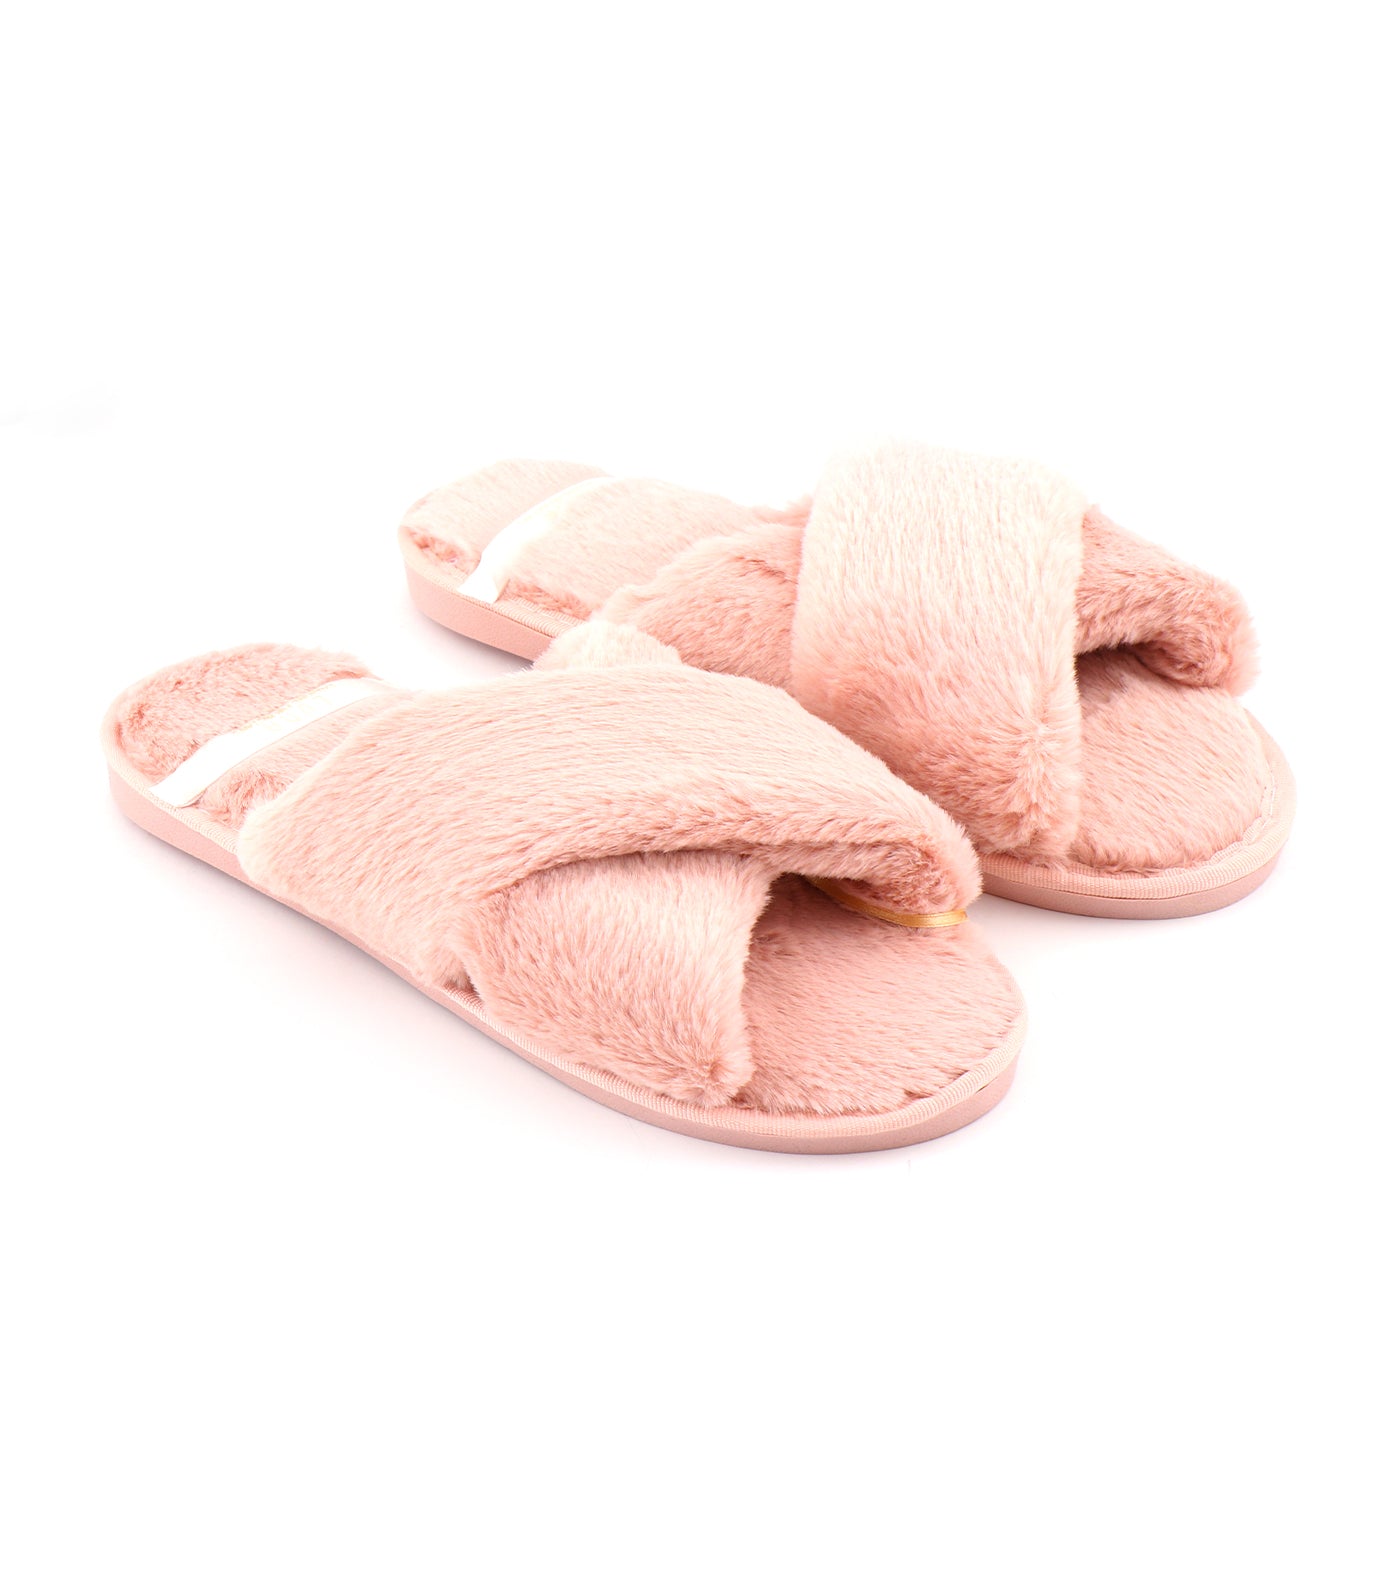 Luxe Chic Slippers - Phina Shop